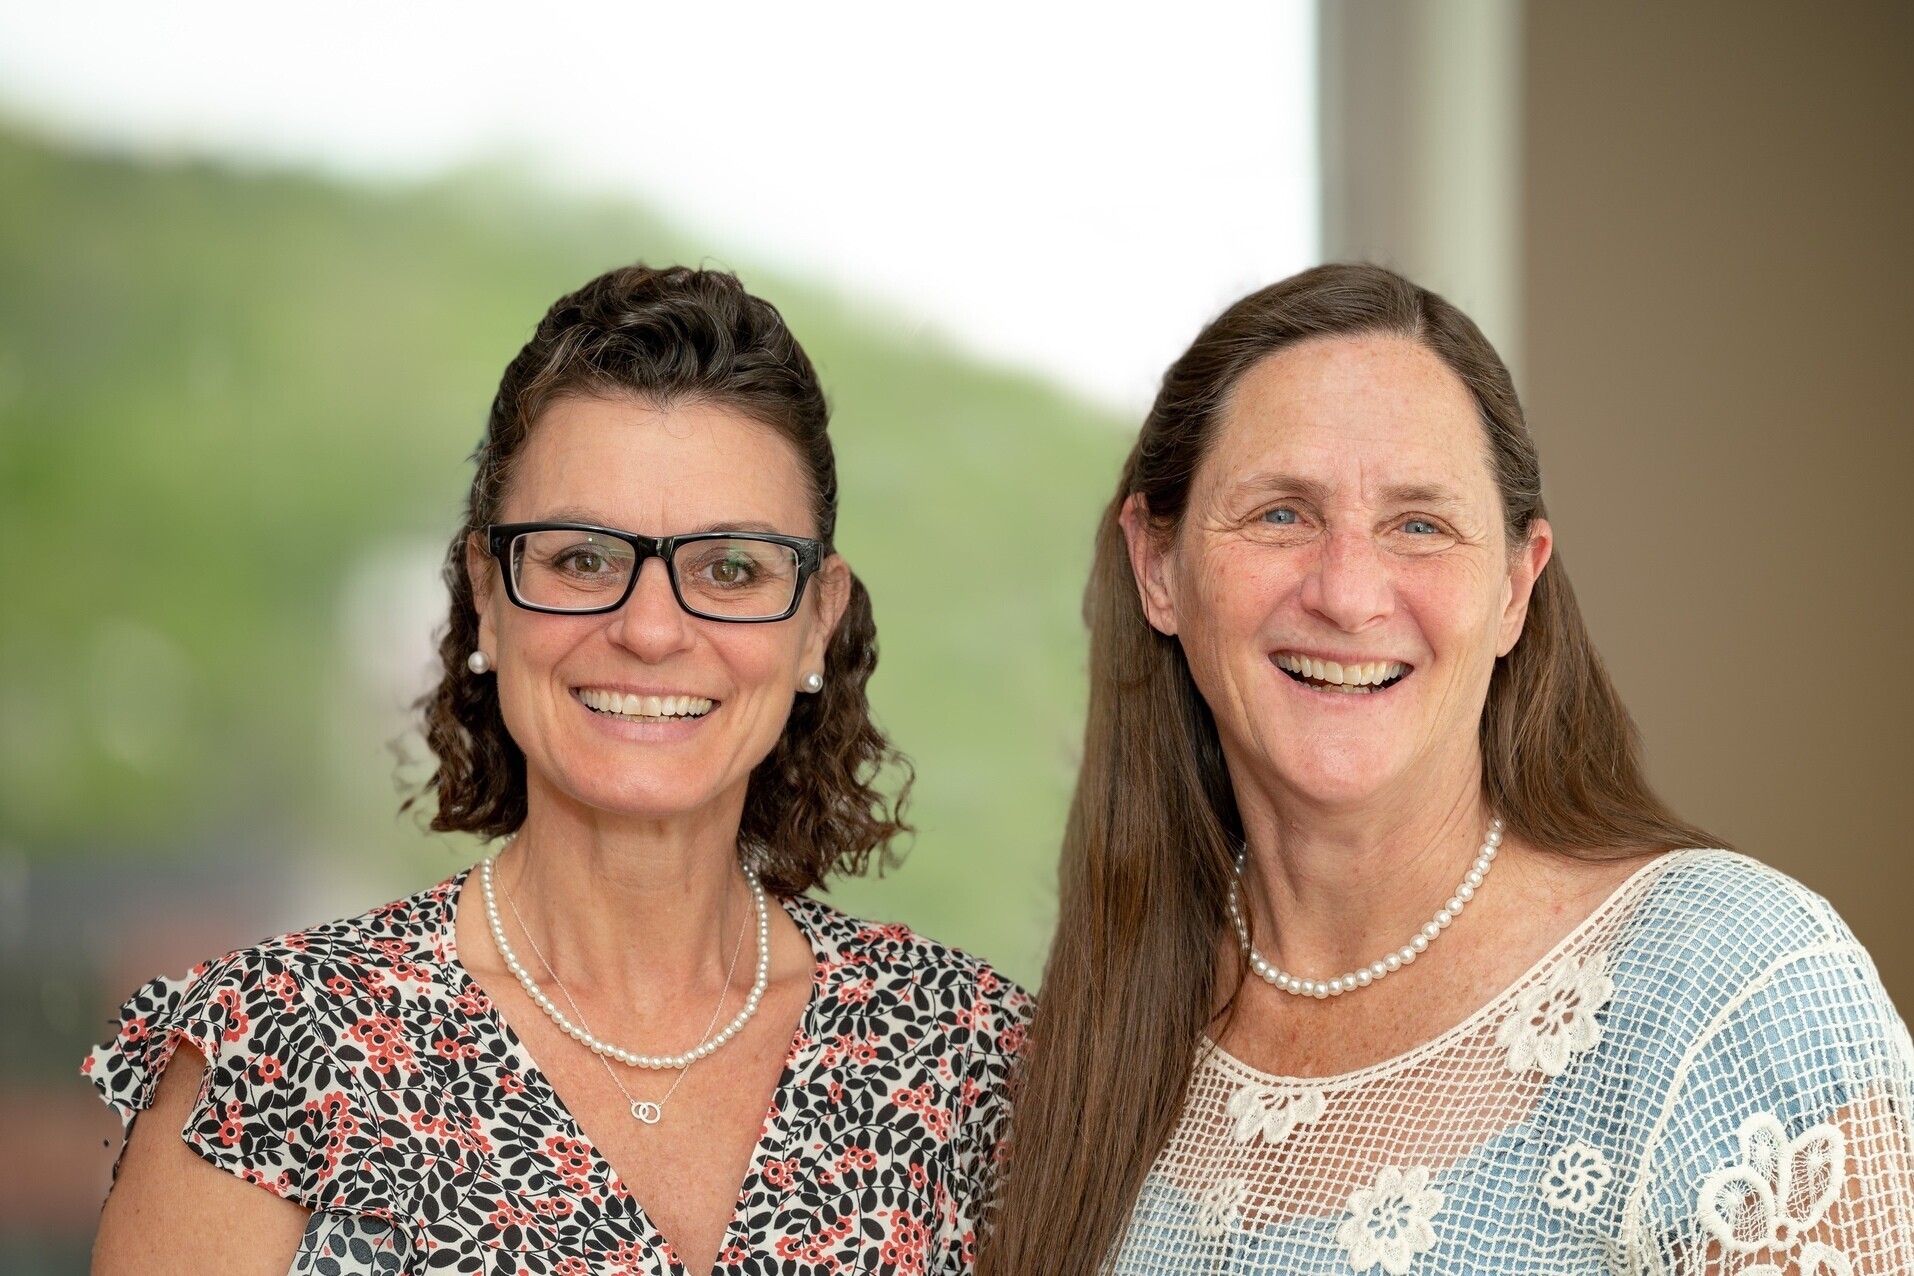 Two smiling women look towards the camera. Rosie, on the left has shoulder length dark brown hair and dark framed glasses. Mary, on the right, has long light brown hair and is wearing a pale blue shirt with crocheted overlay.